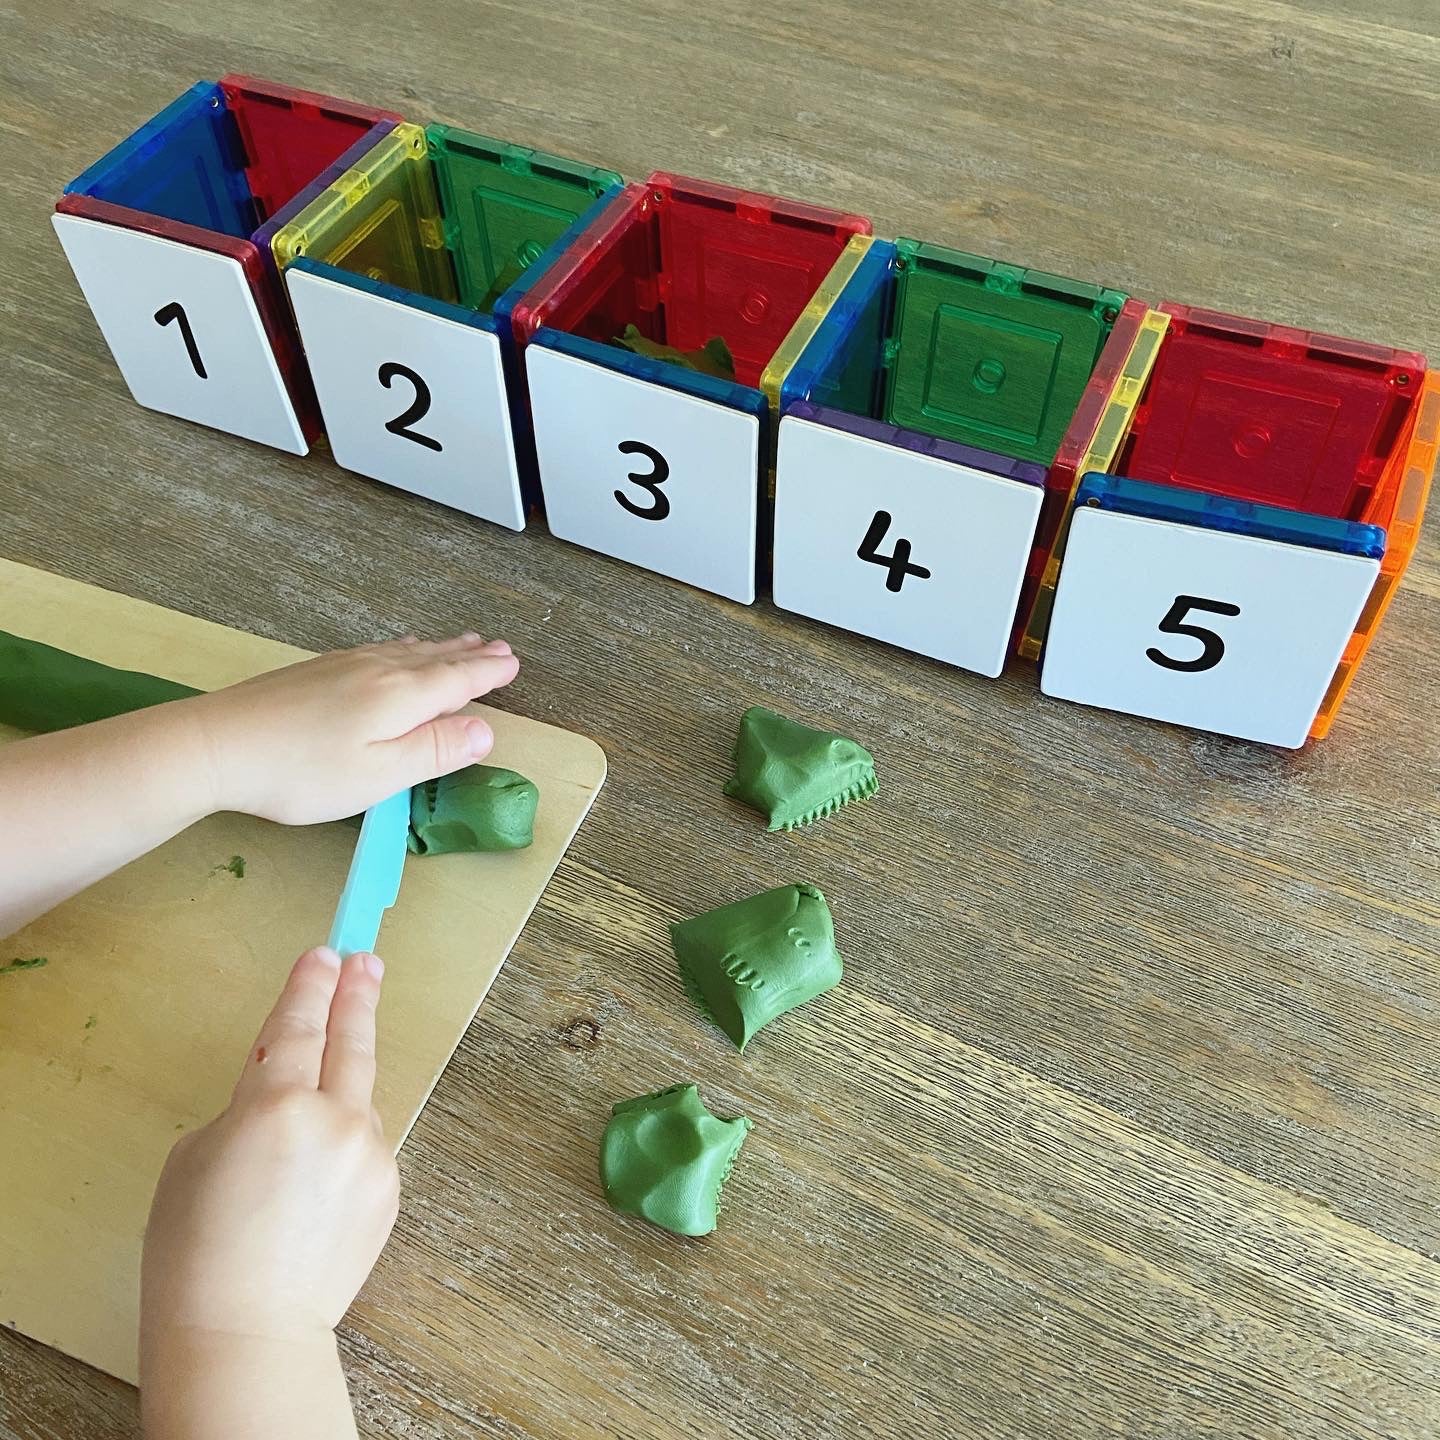 Magnetic Tile Topper - Numeracy Pack